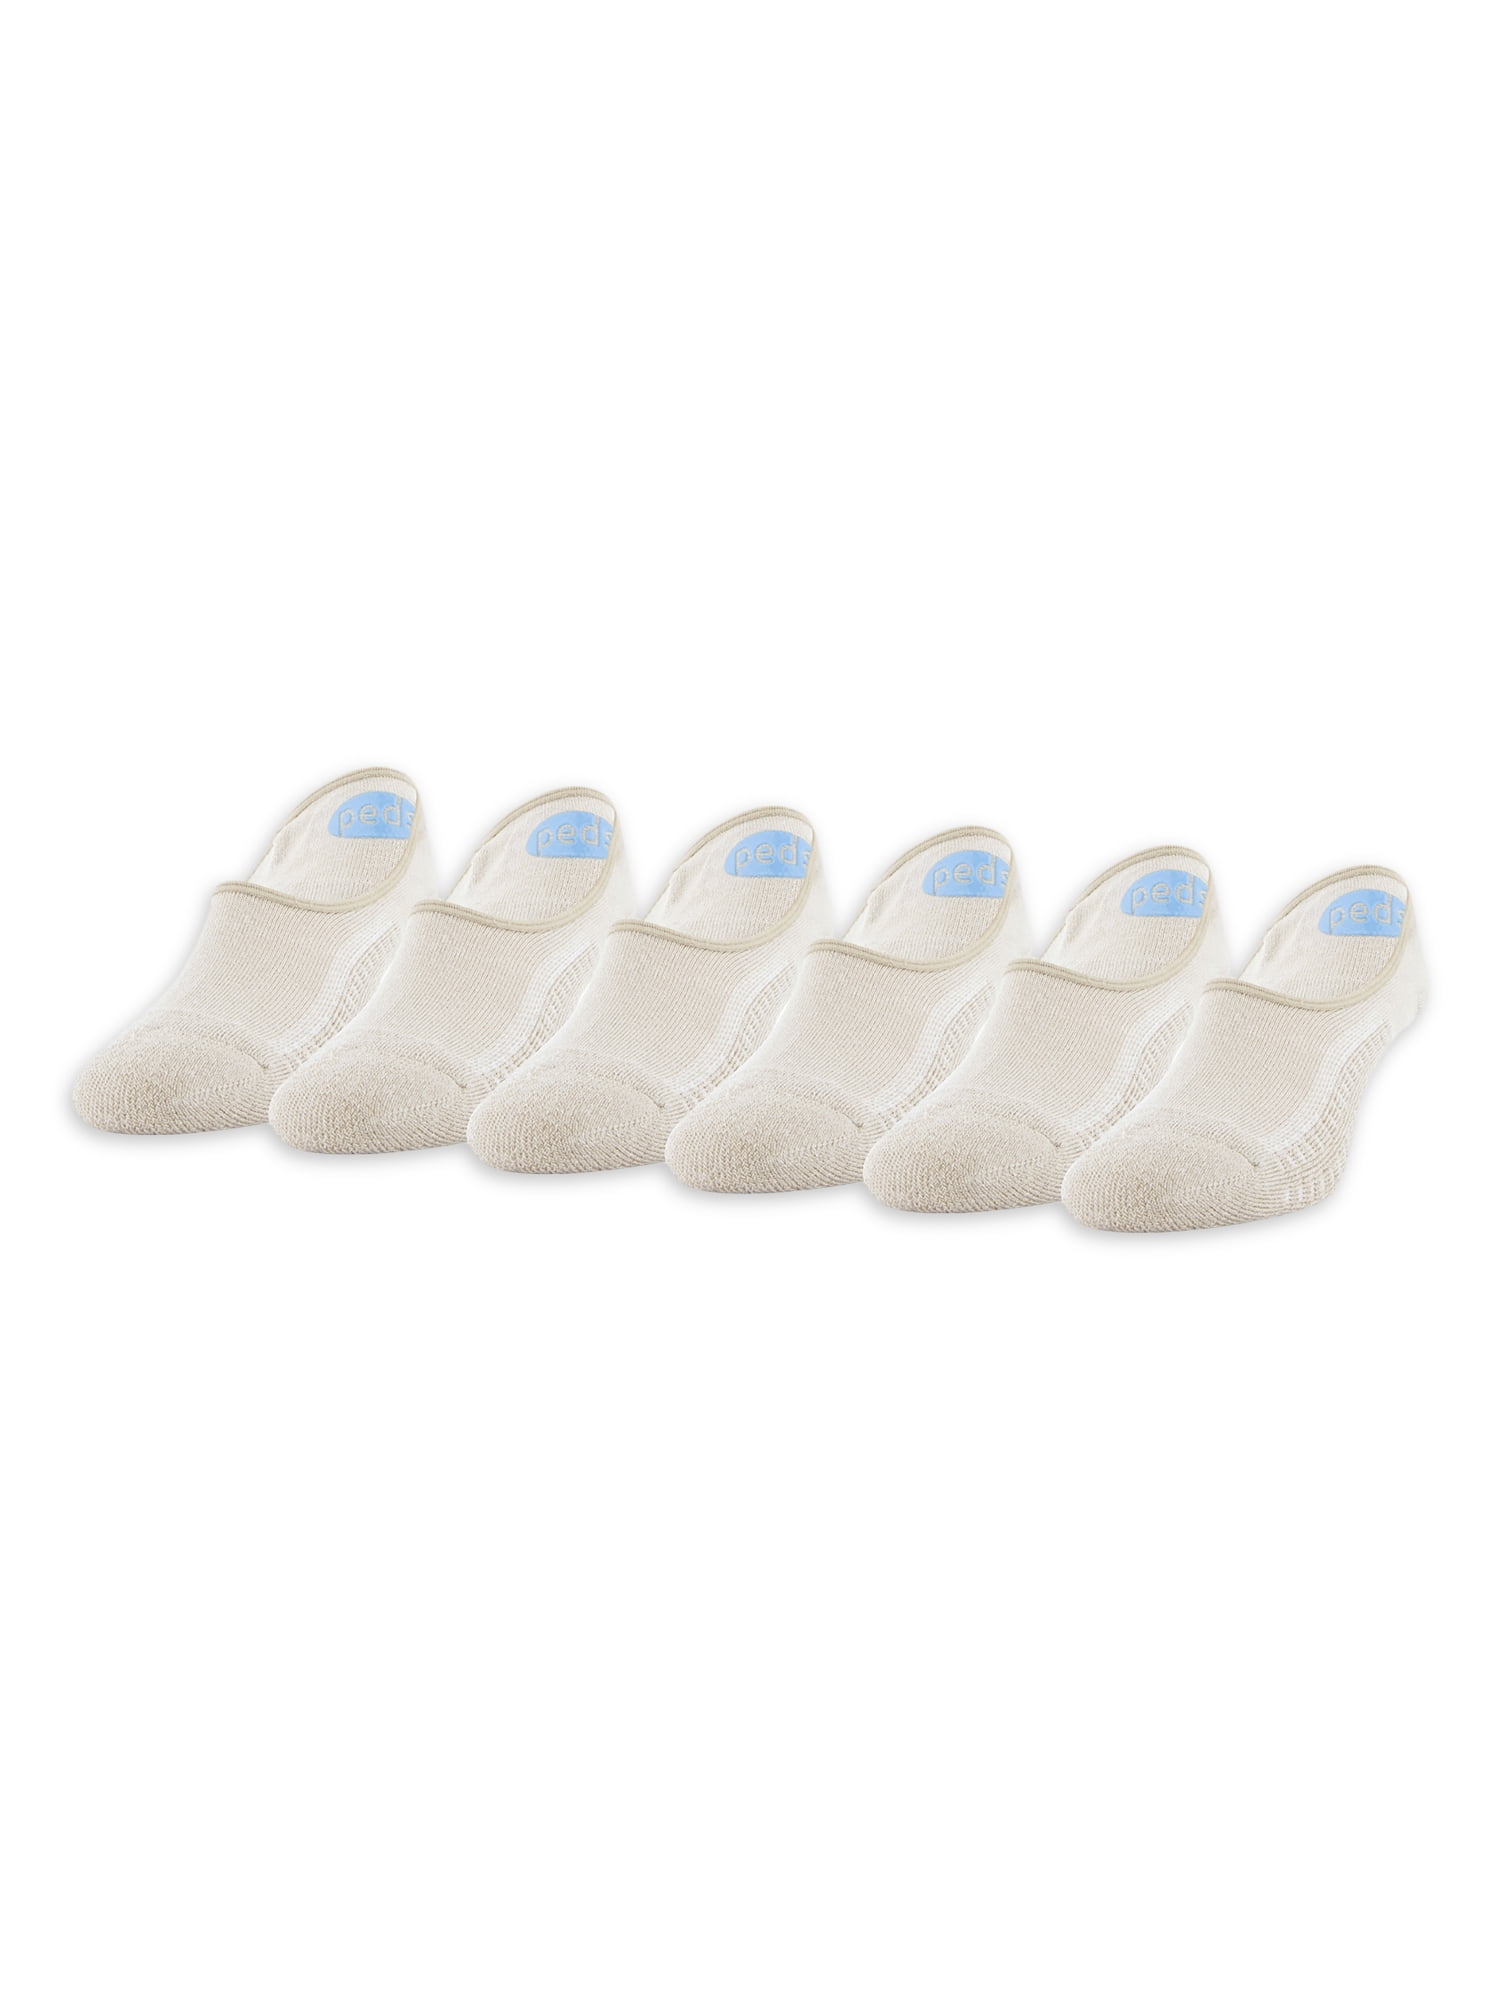 PEDS Women's Cushion Mid Cut No Show Liner Socks, Shoe Sizes 5-10 and 8-12,  6 Pairs 